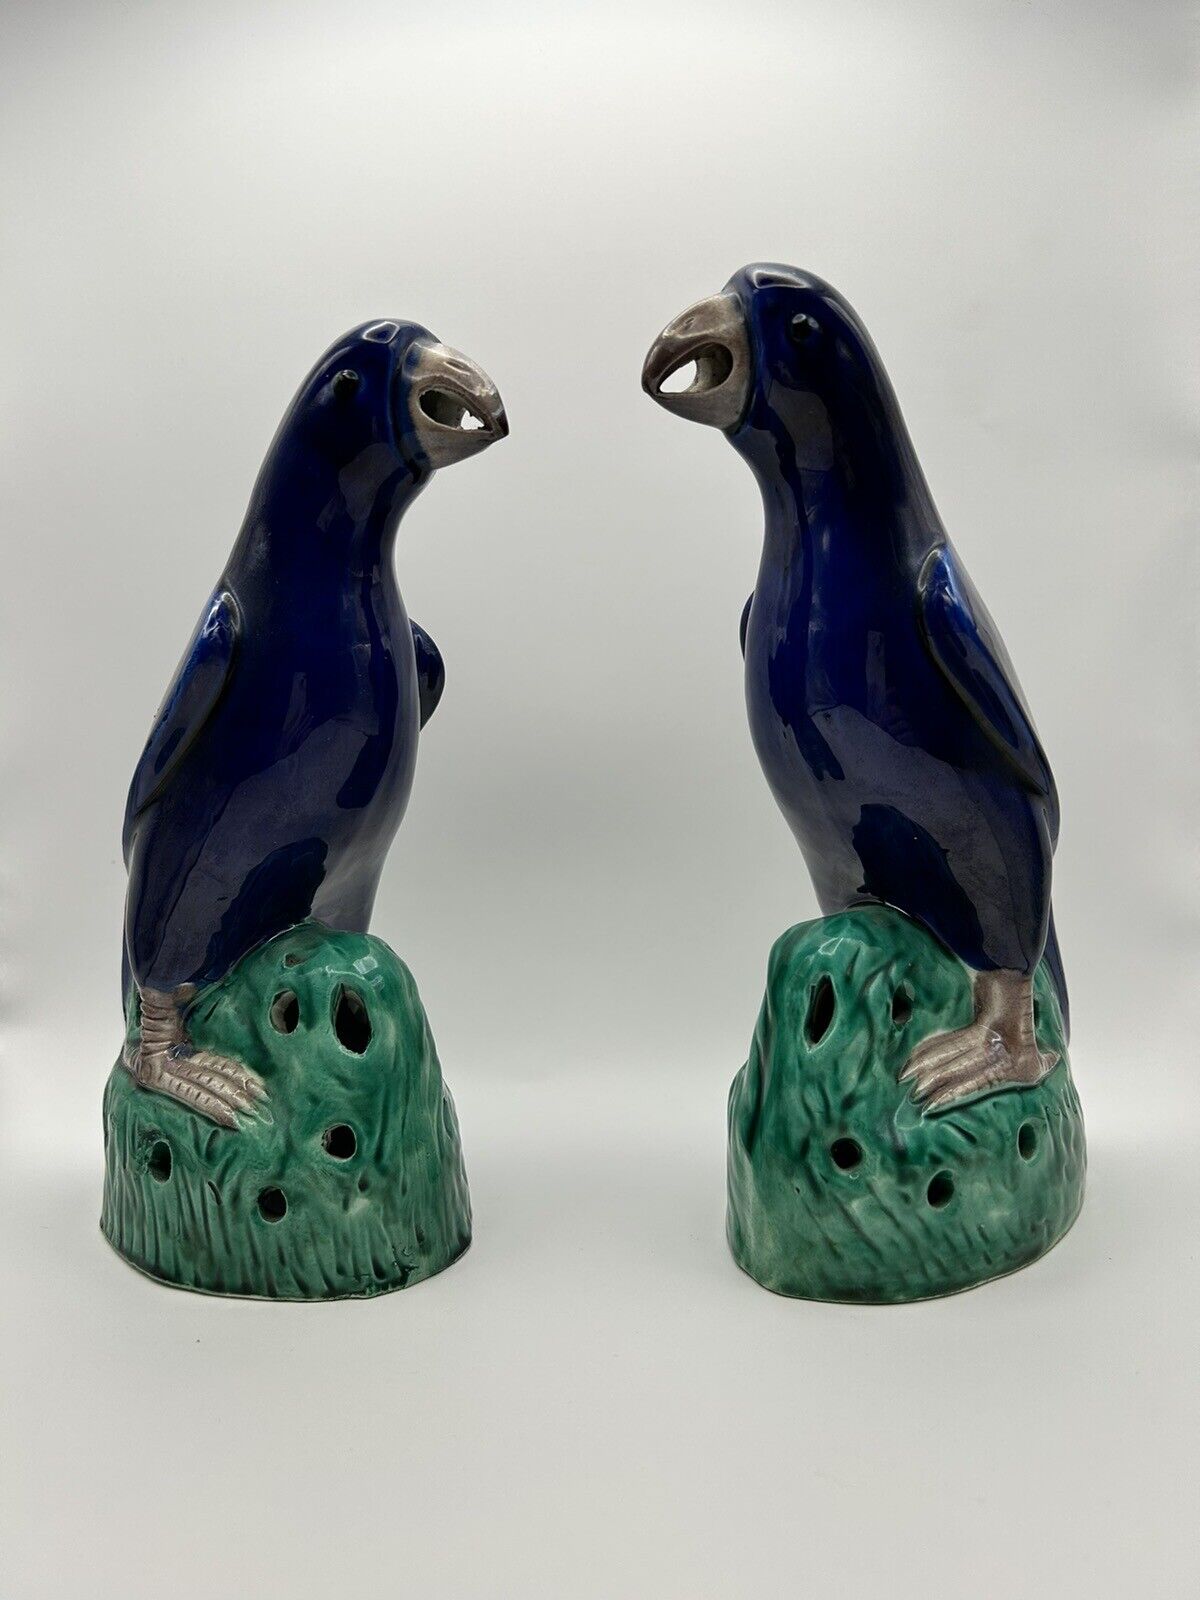 Pair of Authentic 19th Century Chinese Parrots with Cobalt Blue Glaze Figurines